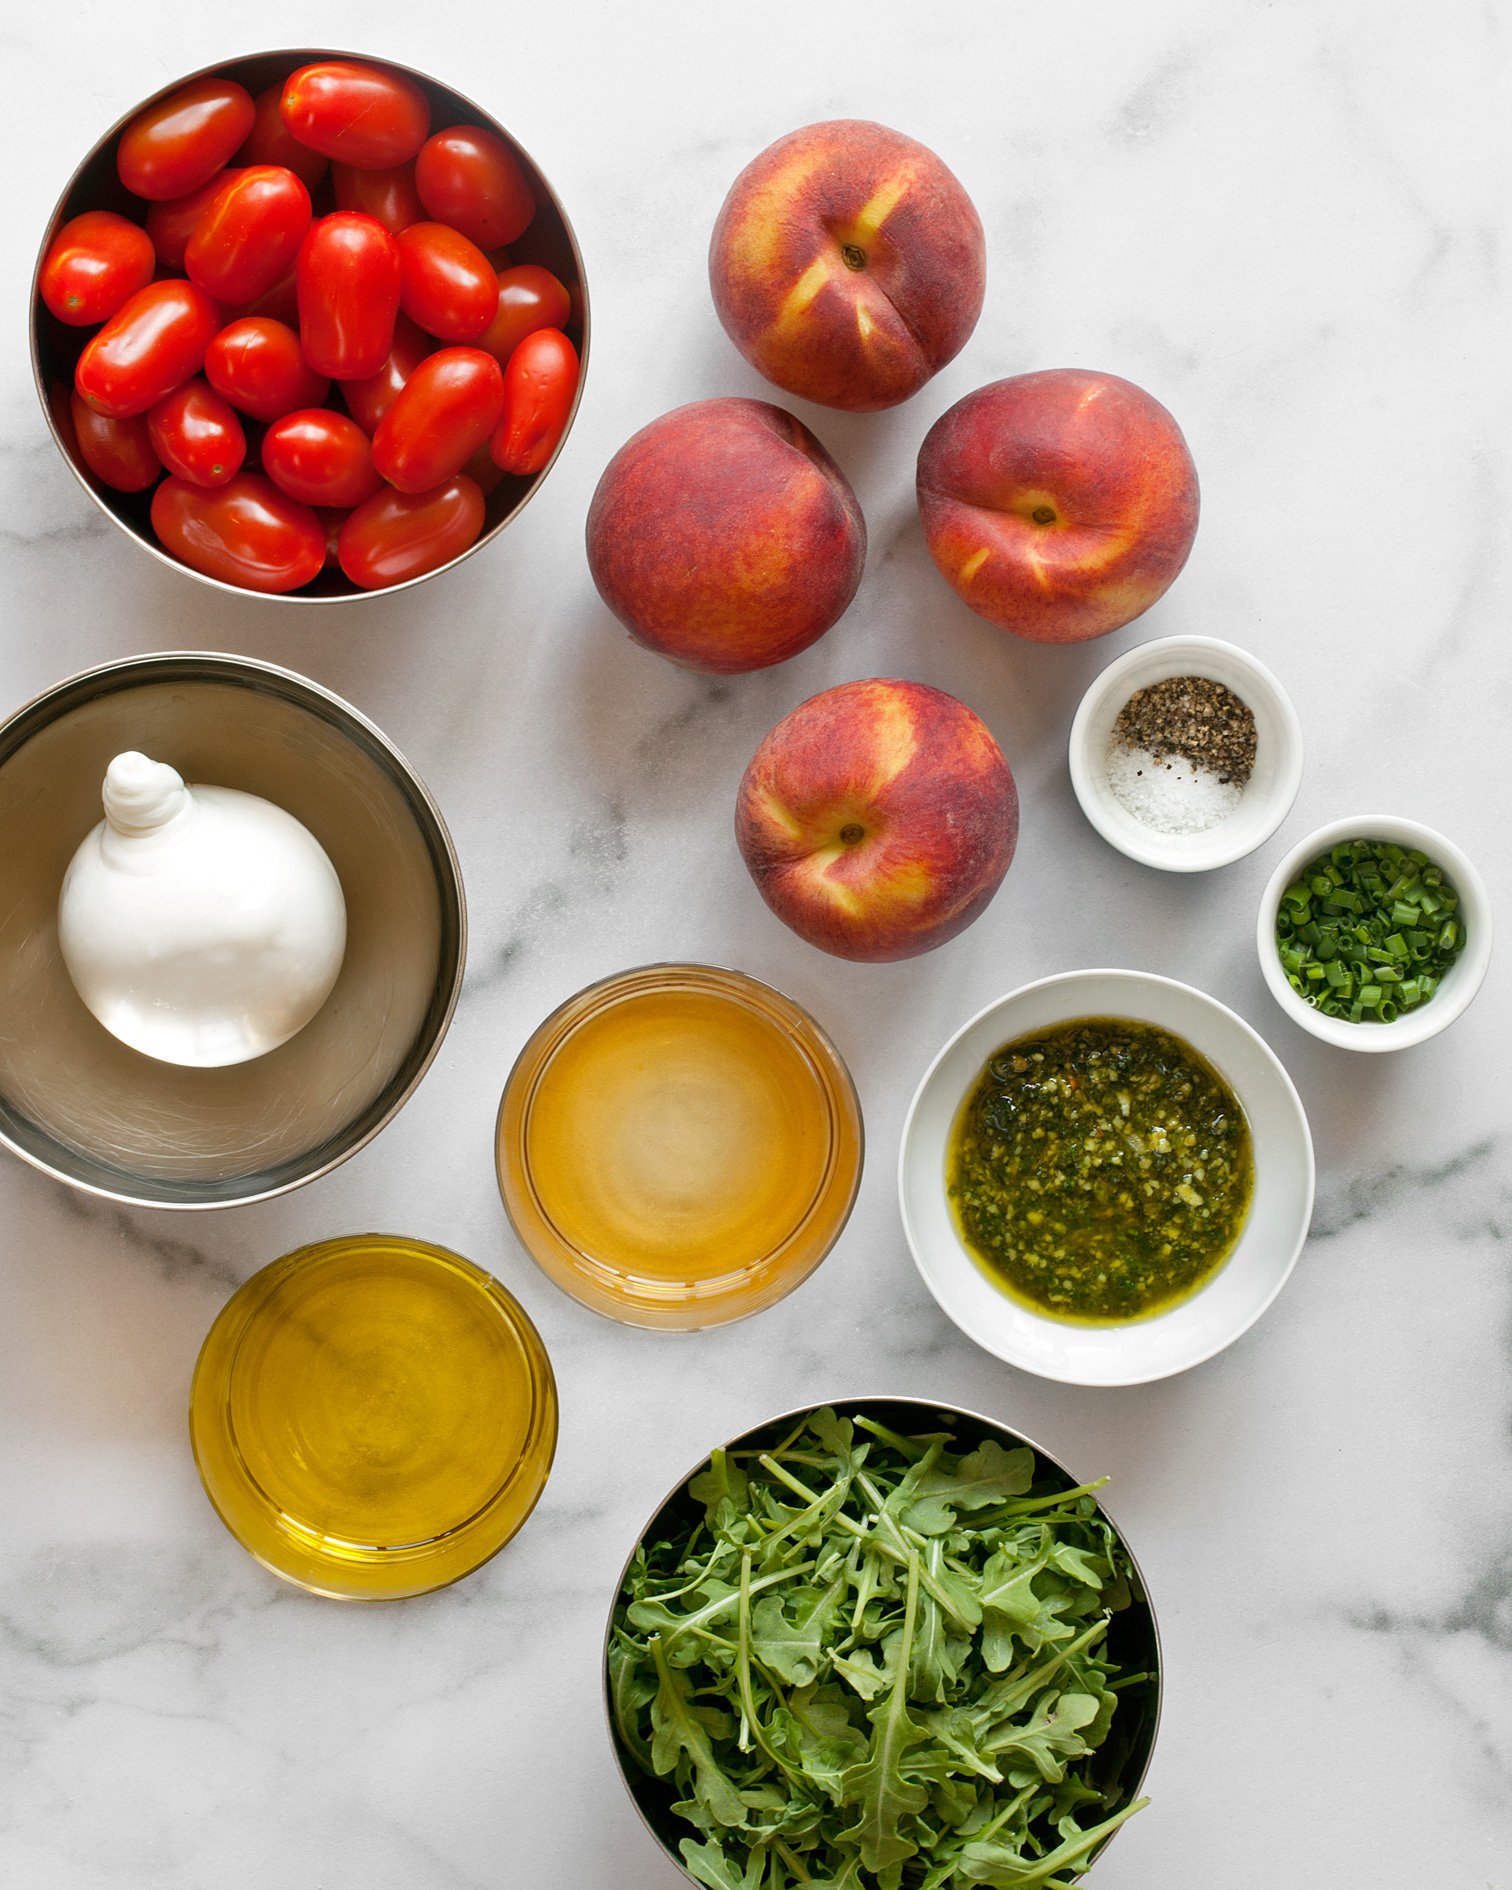 Ingredients including peaches, tomatoes, burrata, arugula and chives.